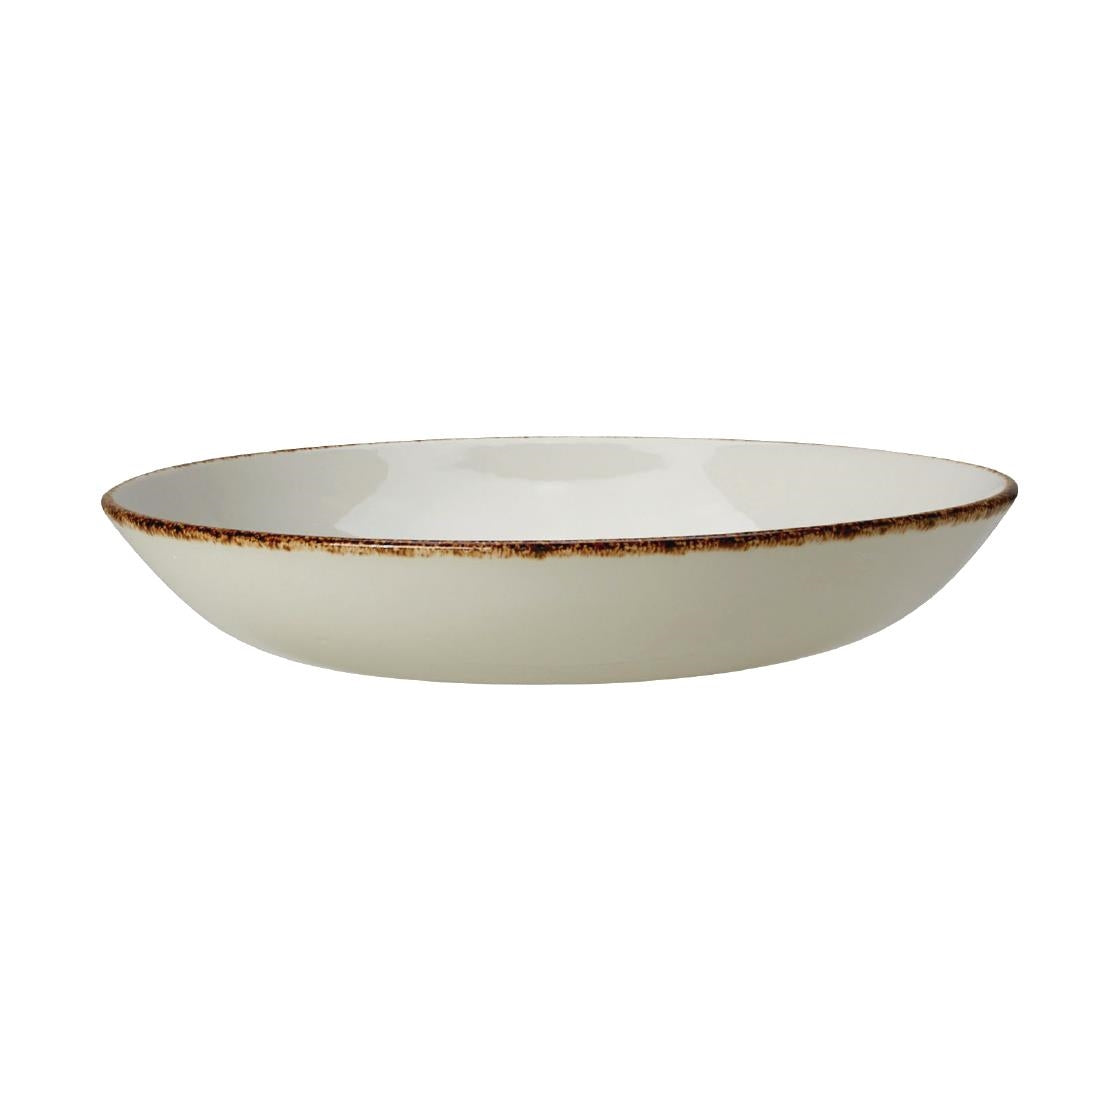 VV760 Steelite Brown Dapple Coupe Bowls 130mm (Pack of 24)